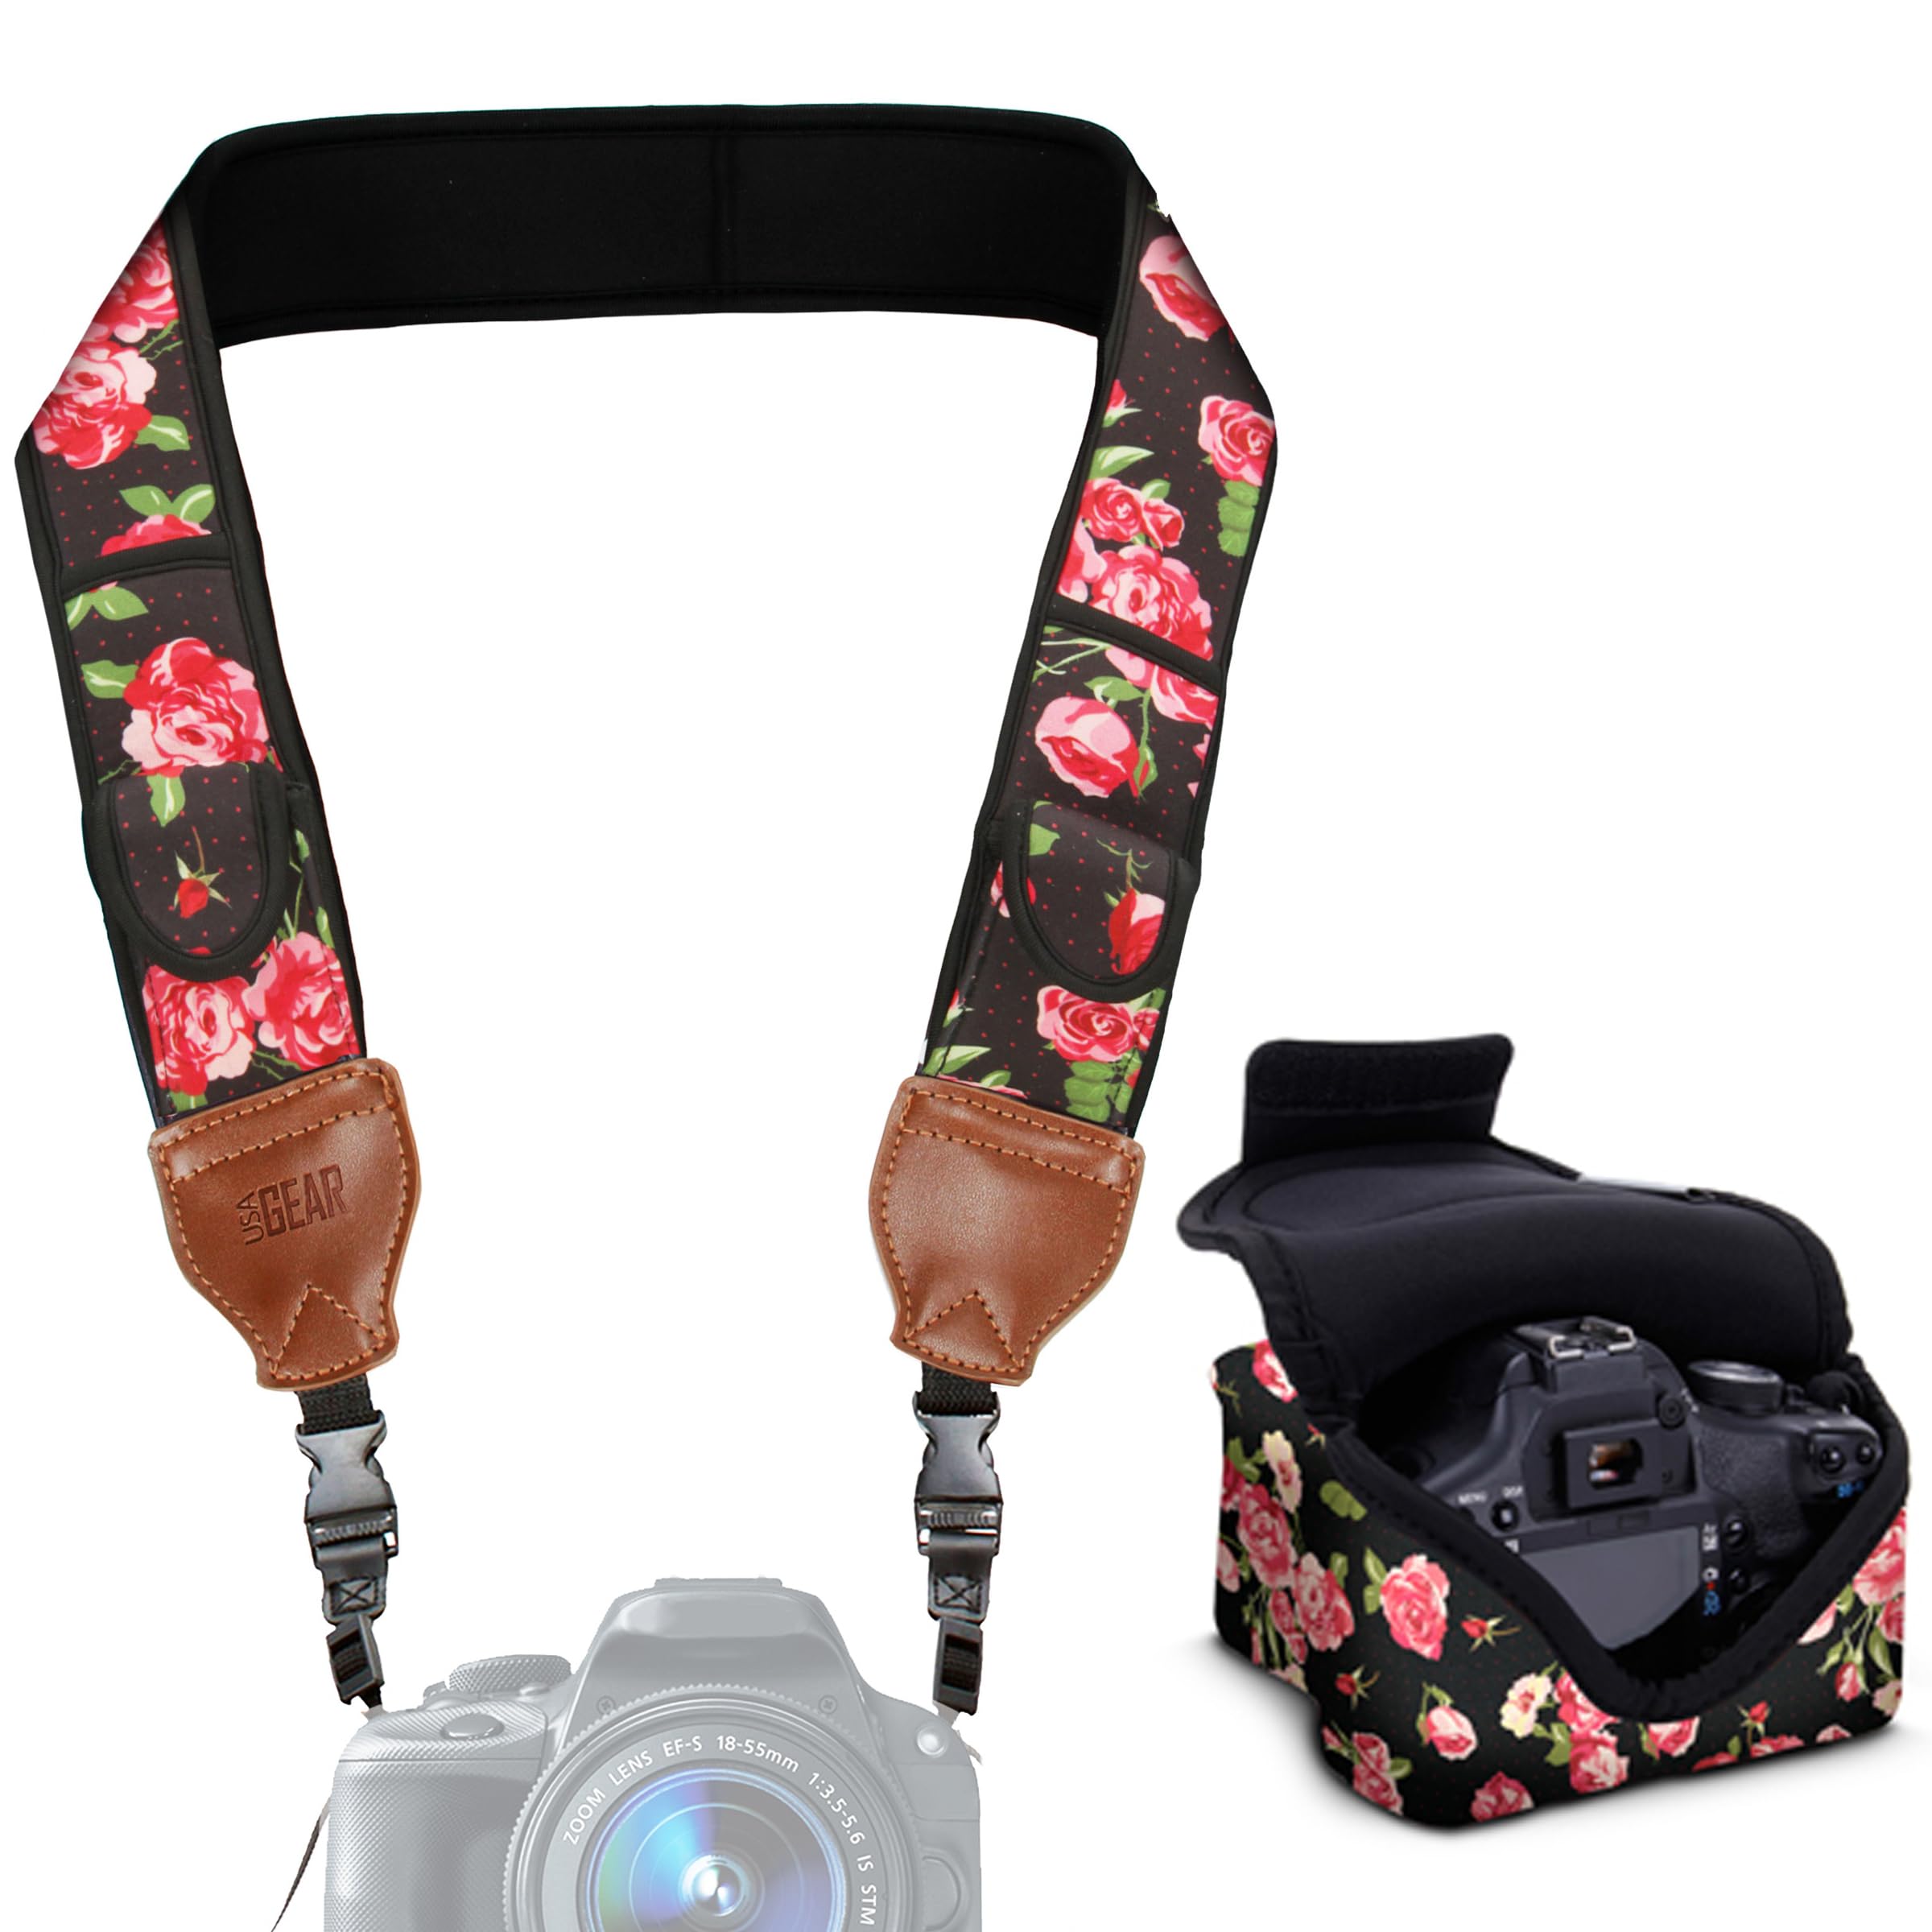 USA Gear DSLR Camera Sleeve with Neoprene Protection and TrueSHOT Padded Camera Neck Strap - Durable, Lightweight and Water Resistant - Compatible with Canon, Nikon, Sony and More Cameras (Floral)